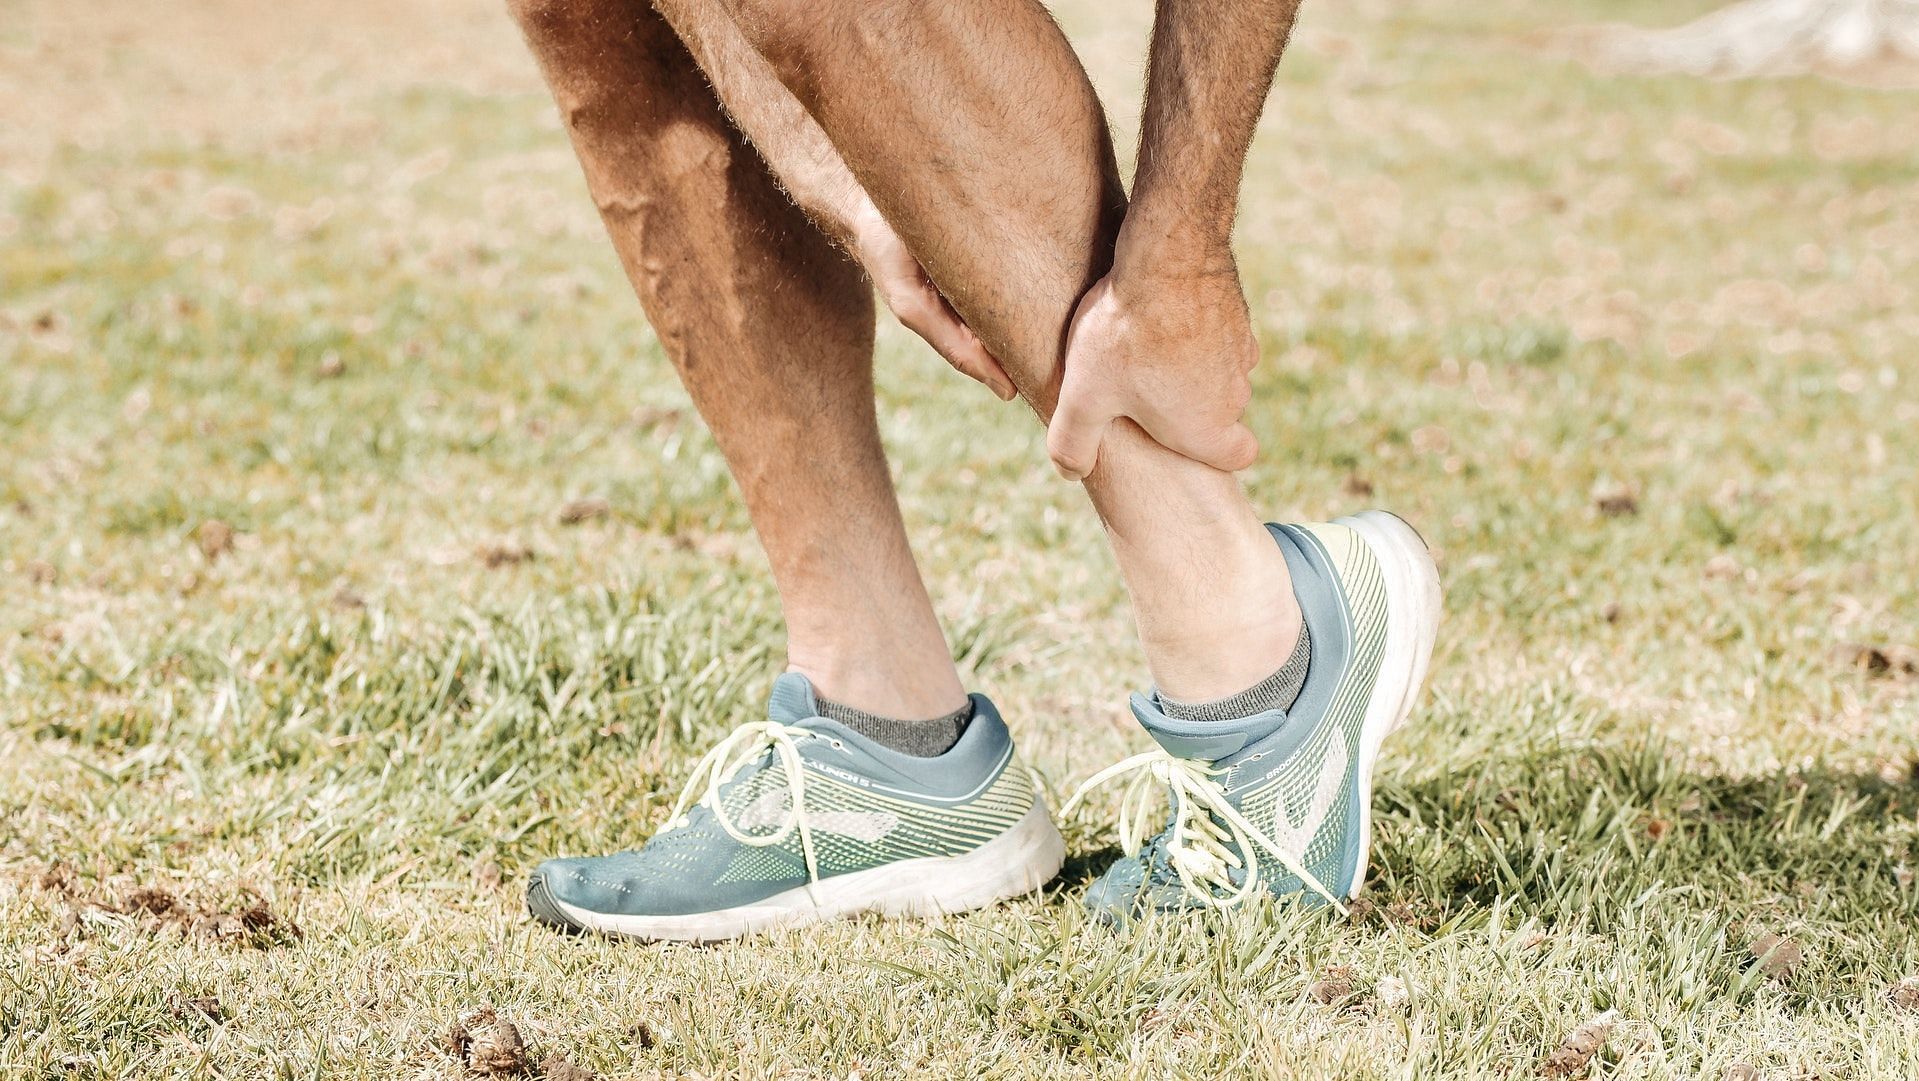 Guide to ankle warm-up exercises. (Image via Pexels/Photo by Kindel Media)